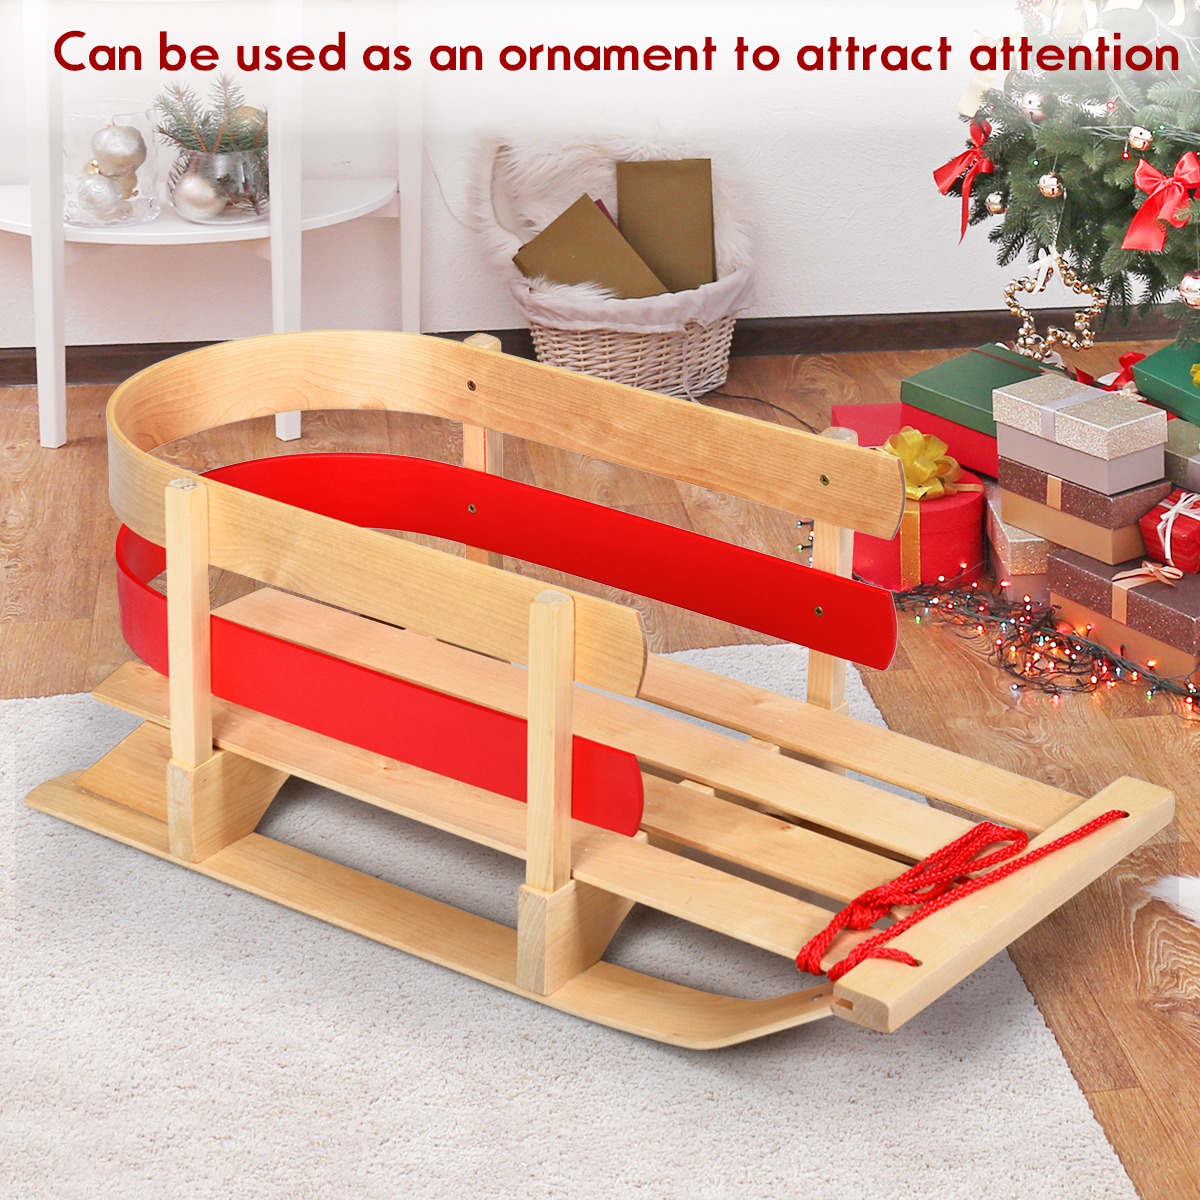 Costway Baby Kids Wooden Sled Solid Seat Toddler Boggan Outdoor Play Snow Toys - image 4 of 9